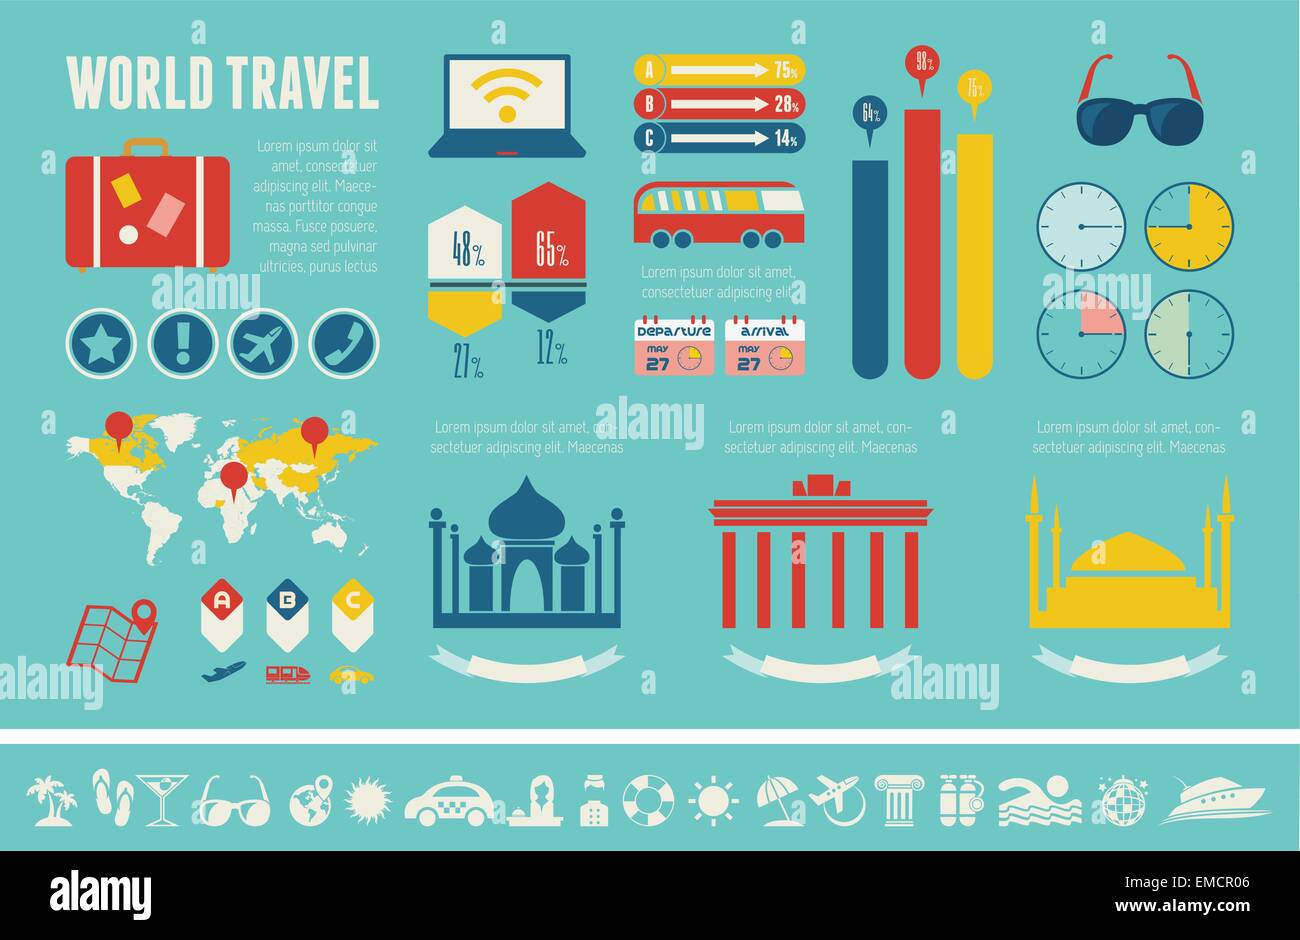 Transportation Infographic Template. Stock Vector